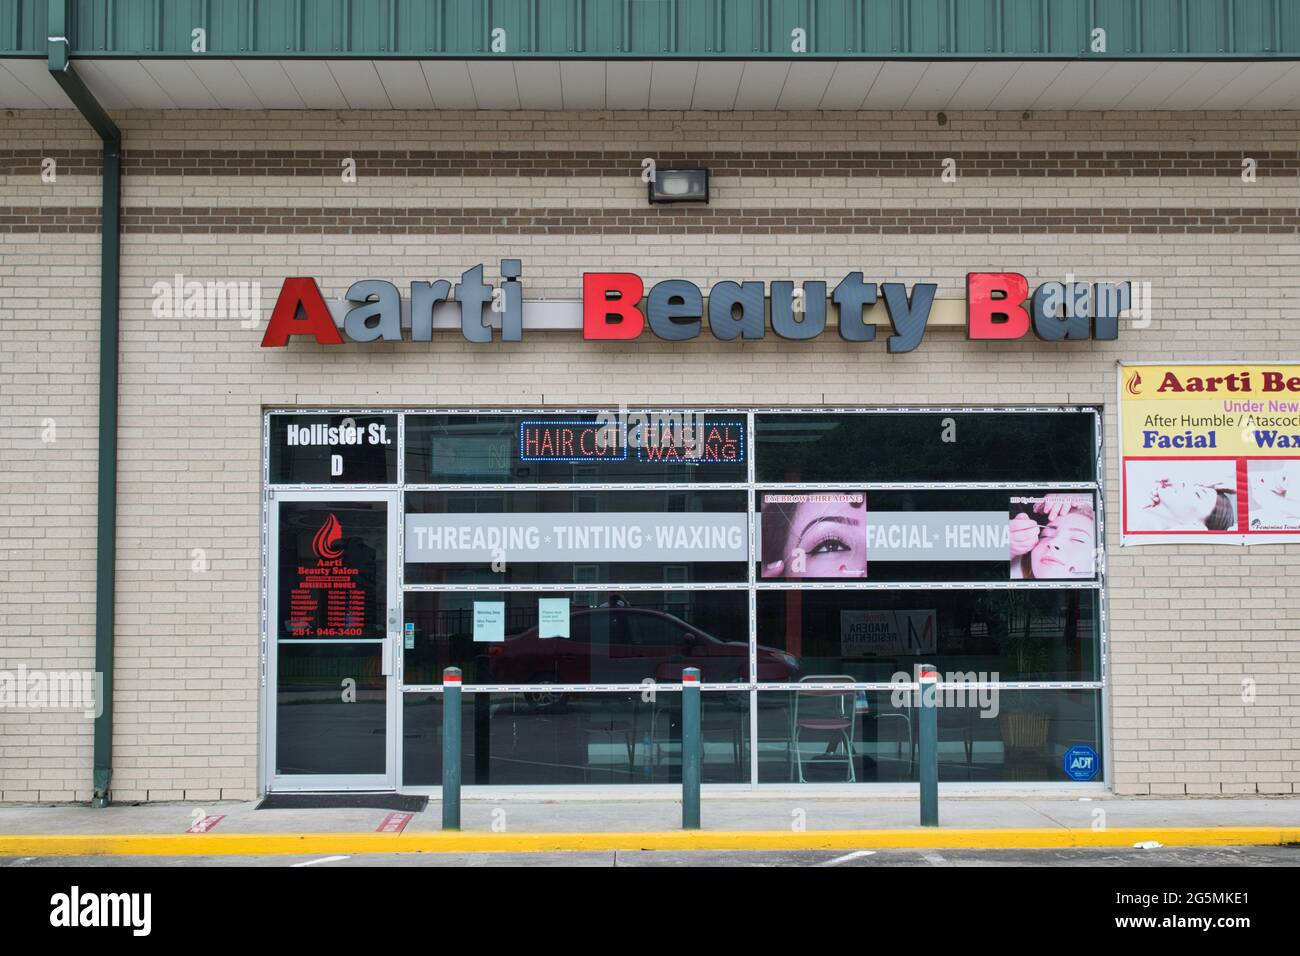 Houston, Texas USA 05-14-2021: Aarti Beauty Bar exterior in Houston, TX. Local business in the Harris County area. Stock Photo